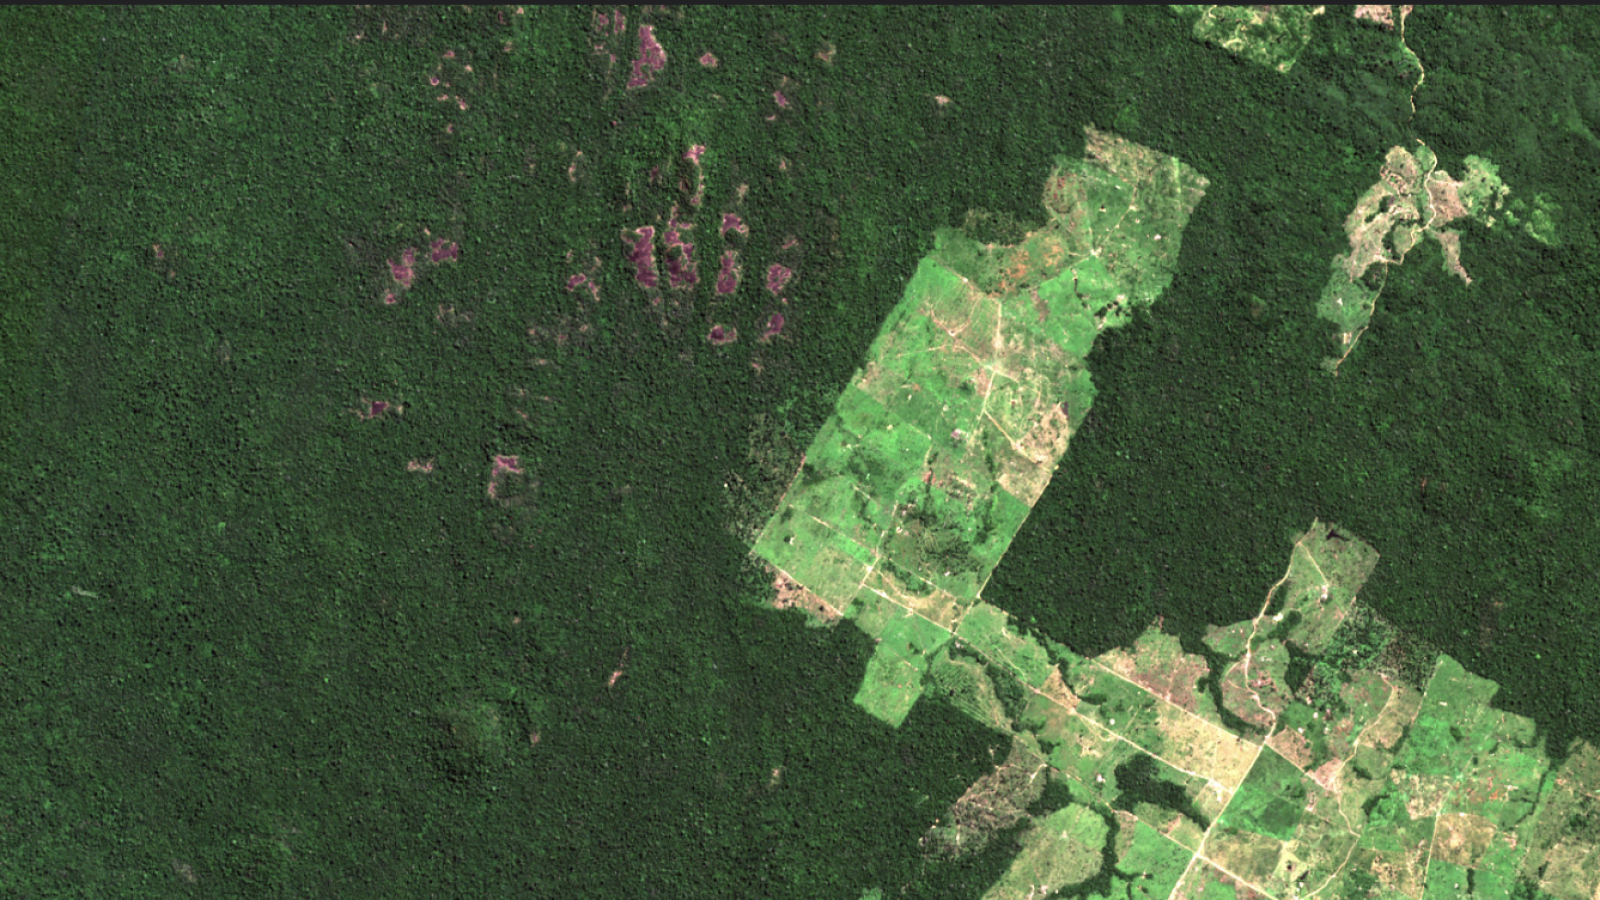 An aerial view of a broad swathe of deforested land surrounded by dark rainforest.